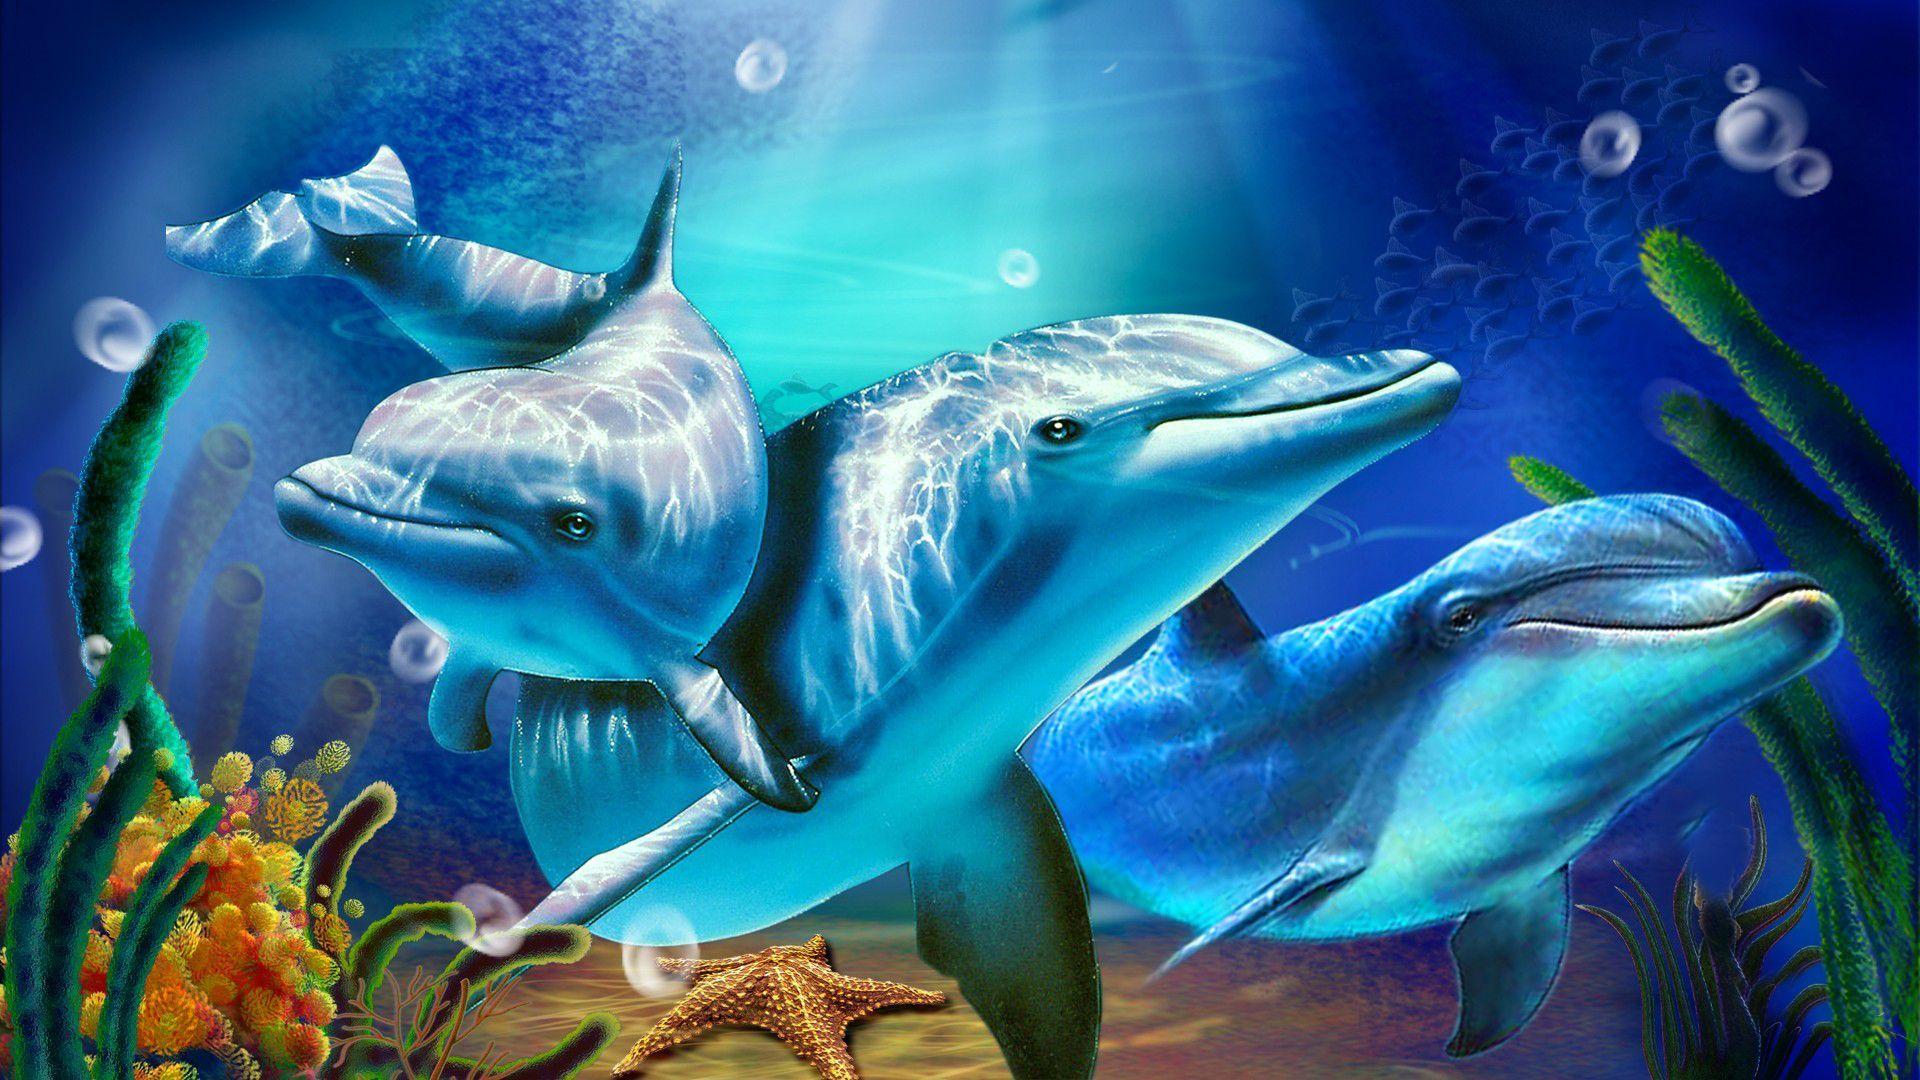 Dolphin Animated wallpaper. Dolphins animal, Underwater wallpaper, Dolphin art